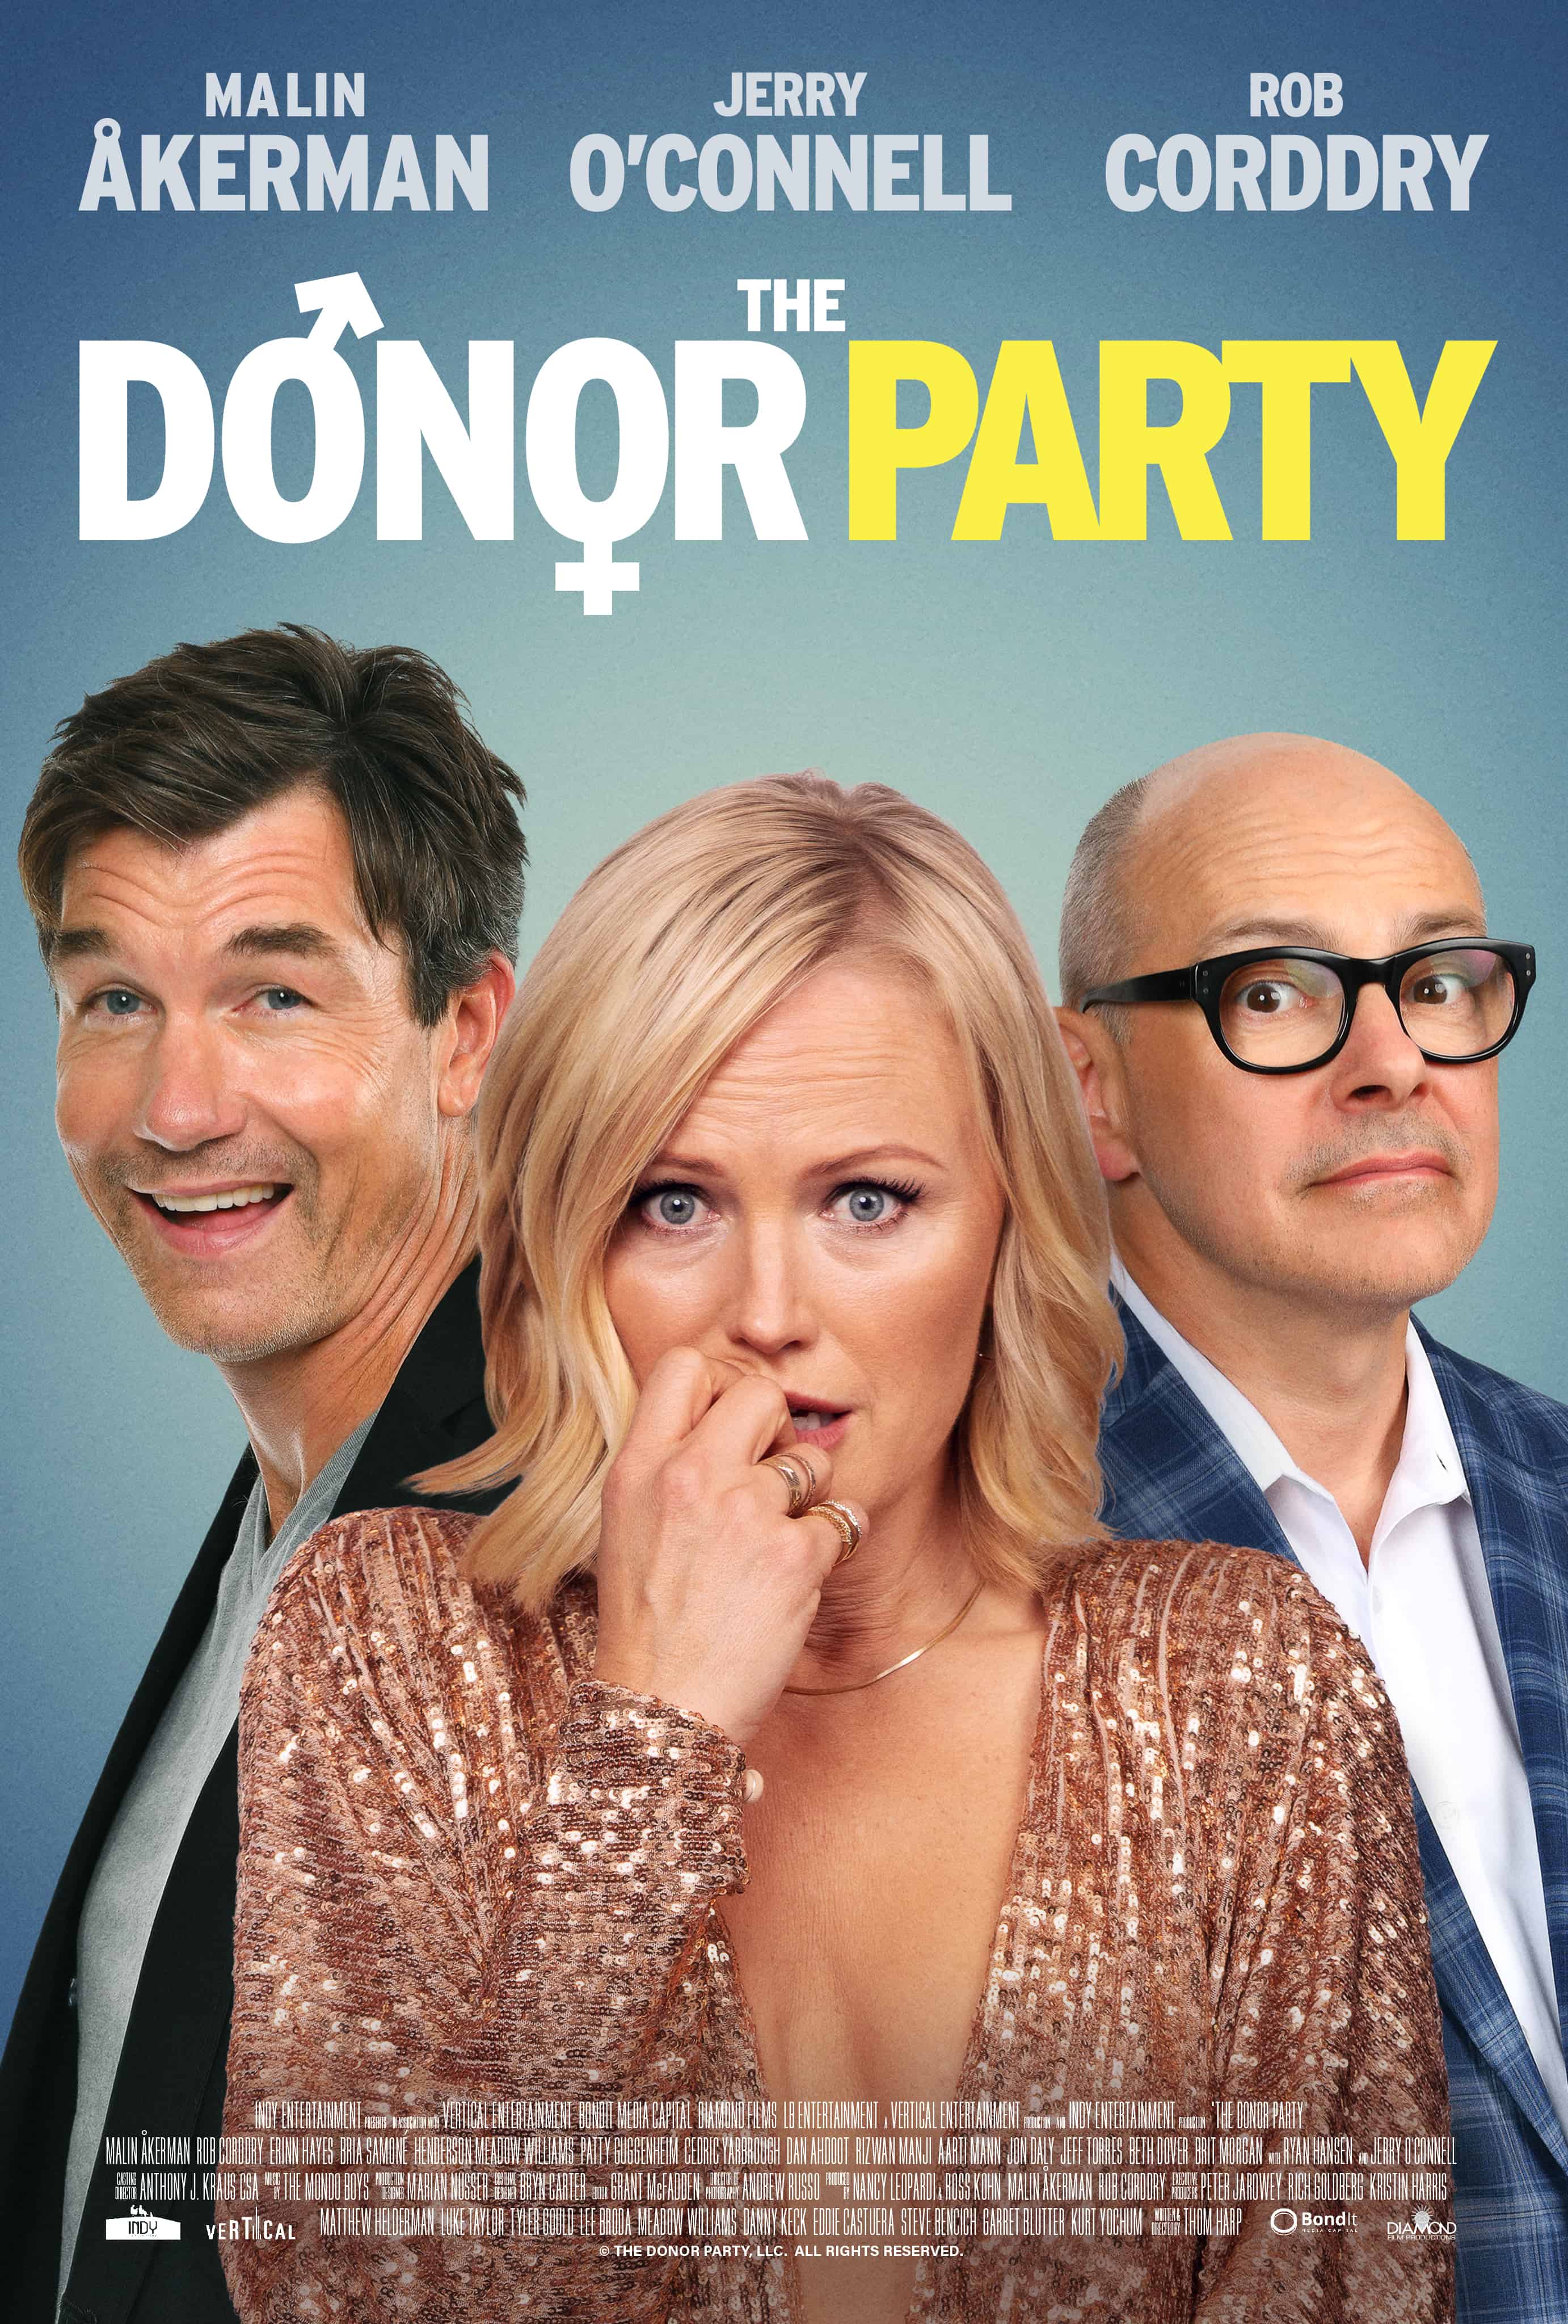 The Donor Party has a new clip! 3